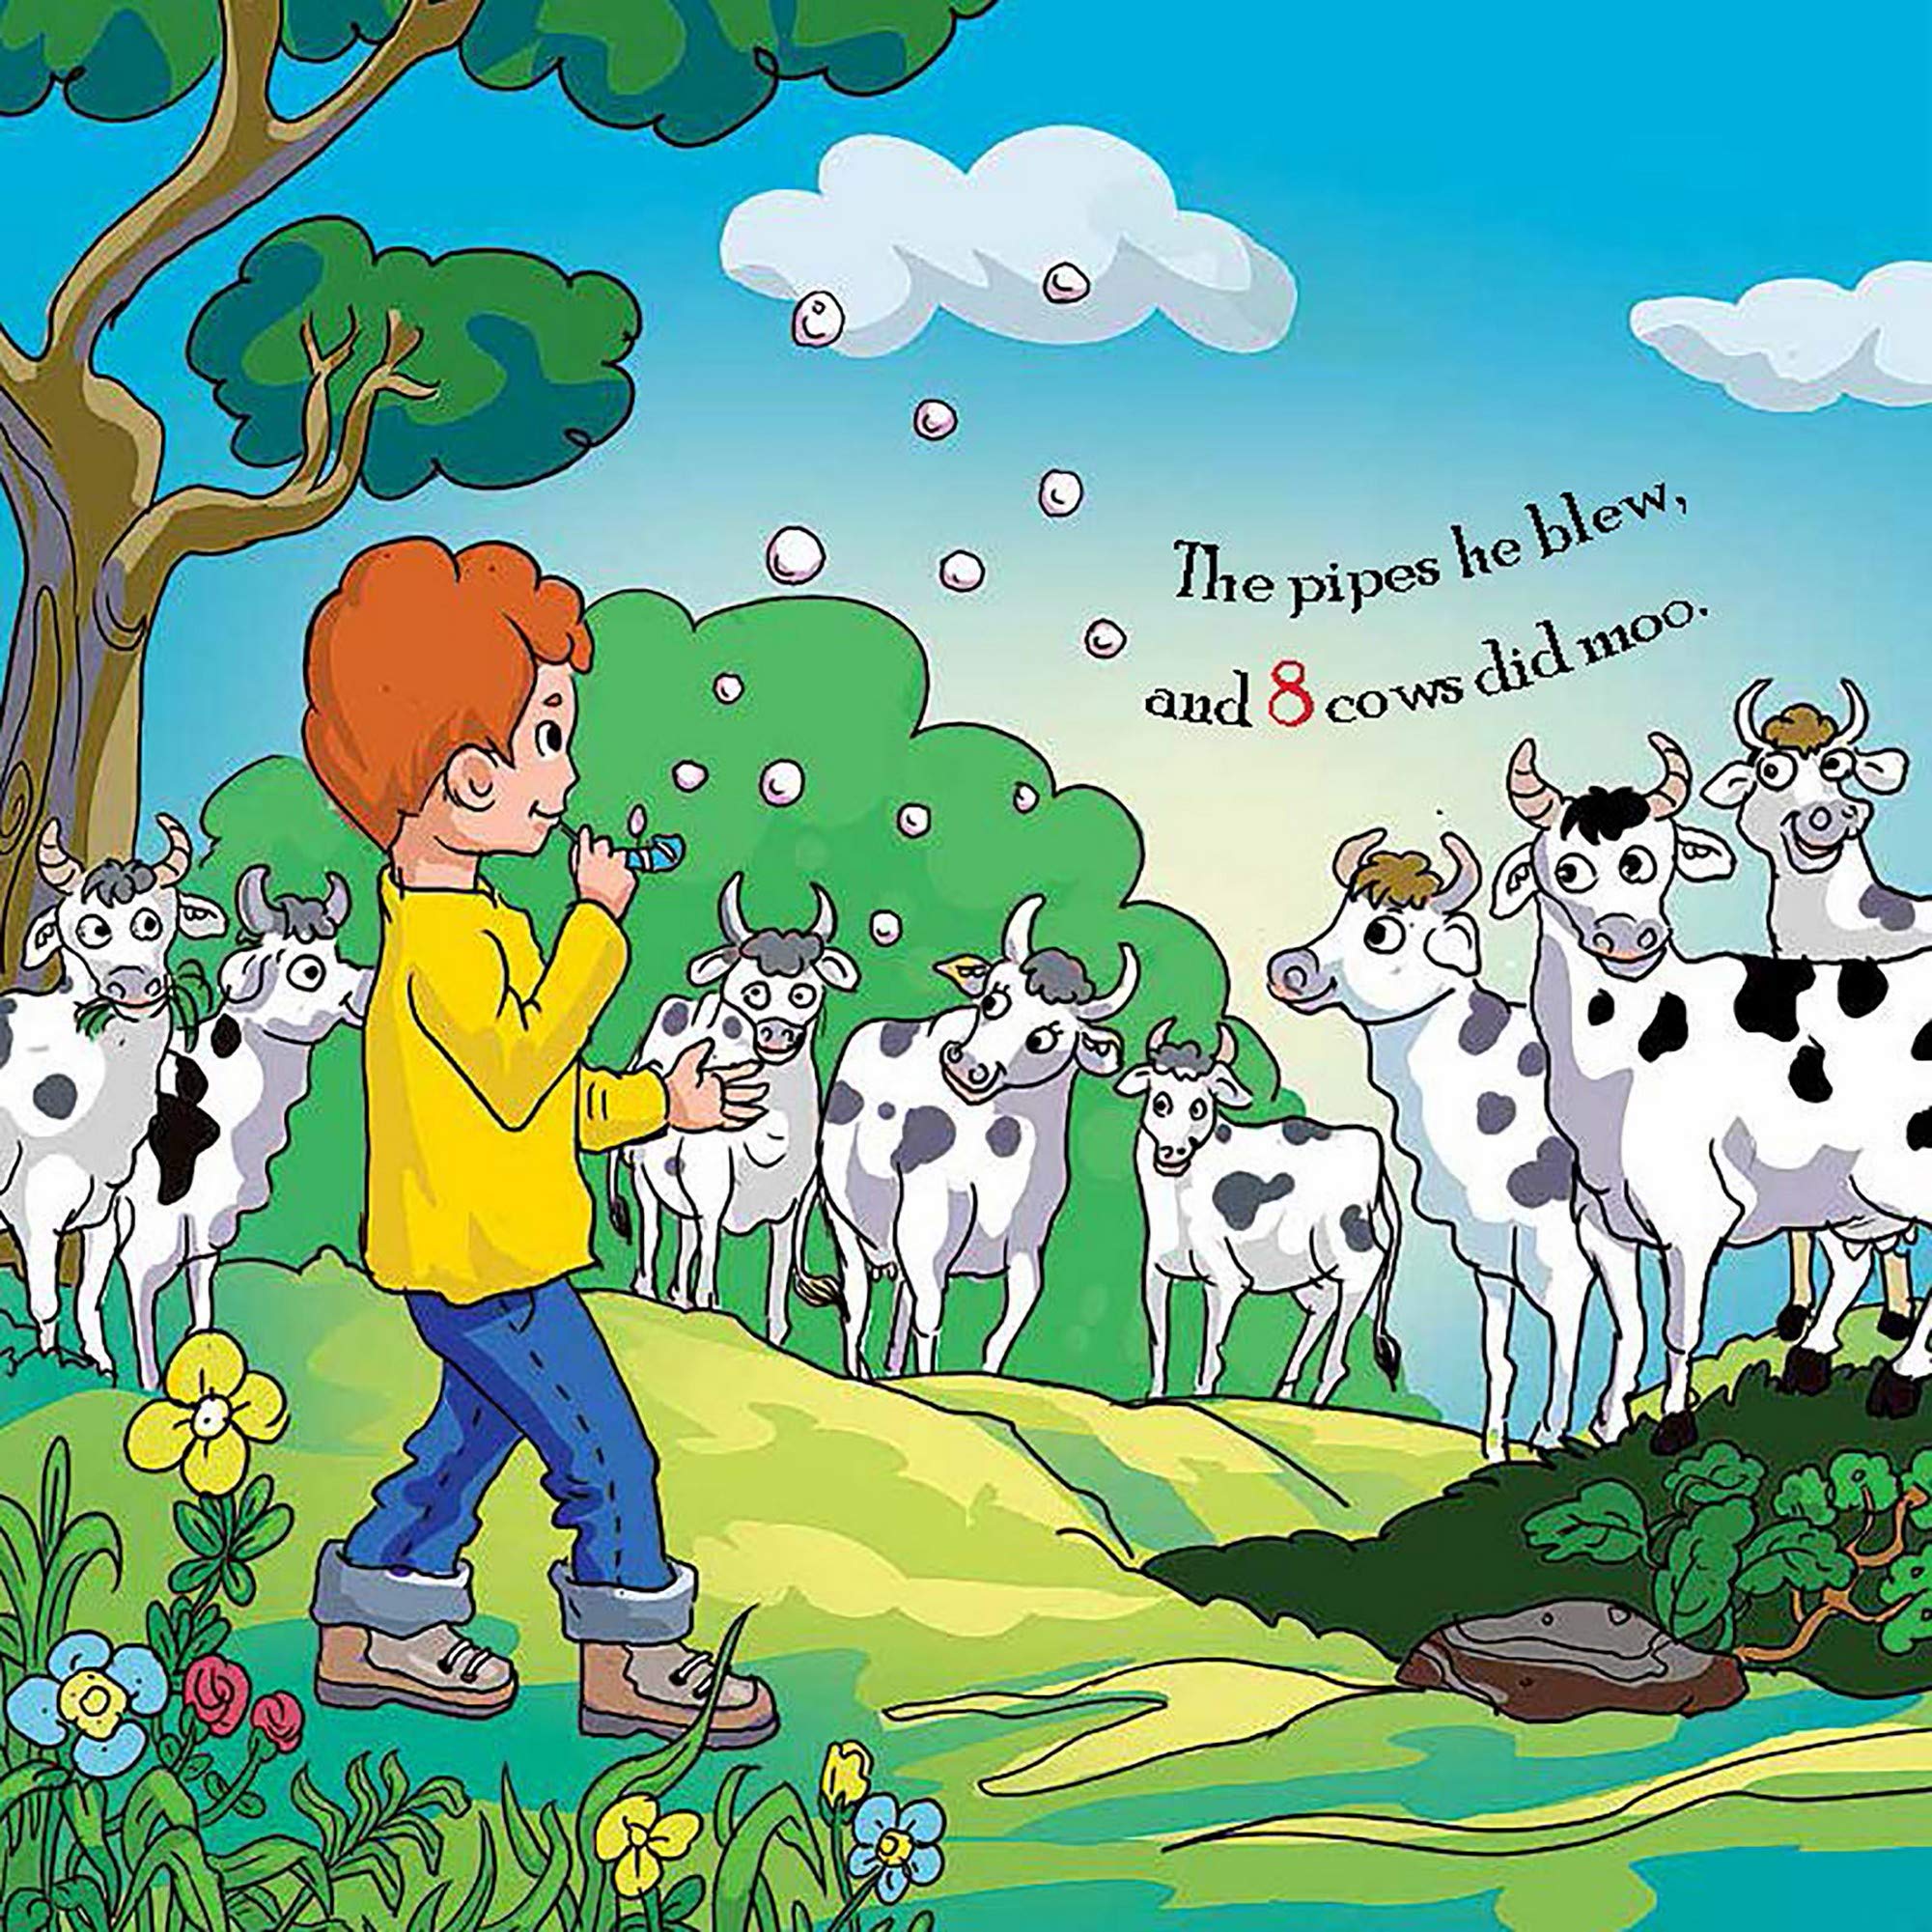 Book of Numbers (That's My First) Learning Picture Book to Learn Numbers For Kids